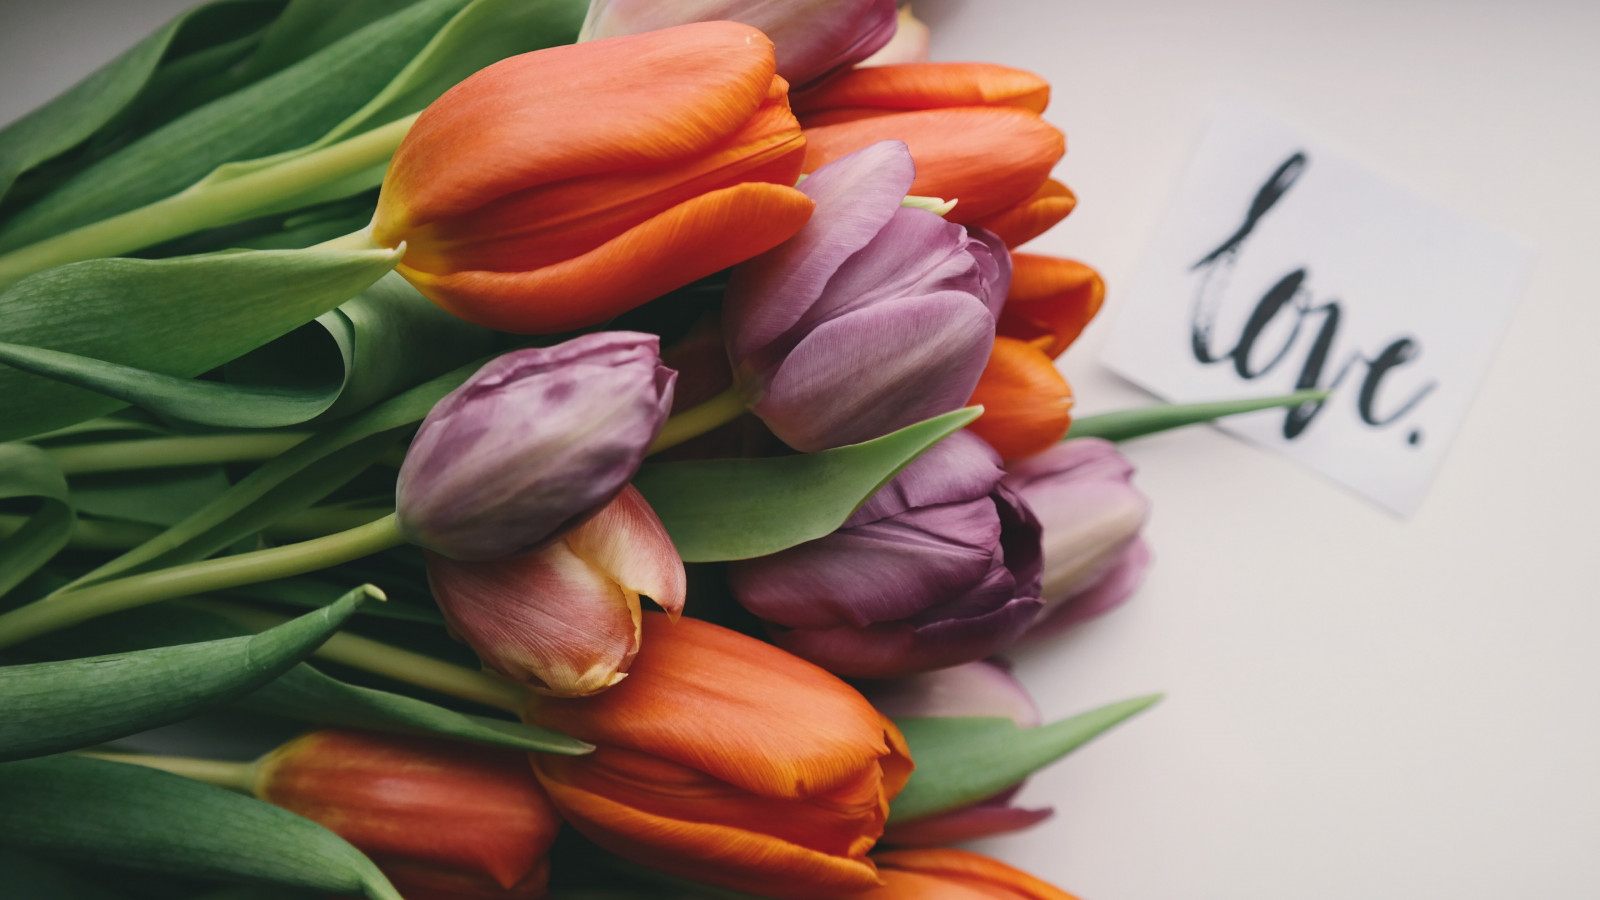 Tulips with love wallpaper 1600x900